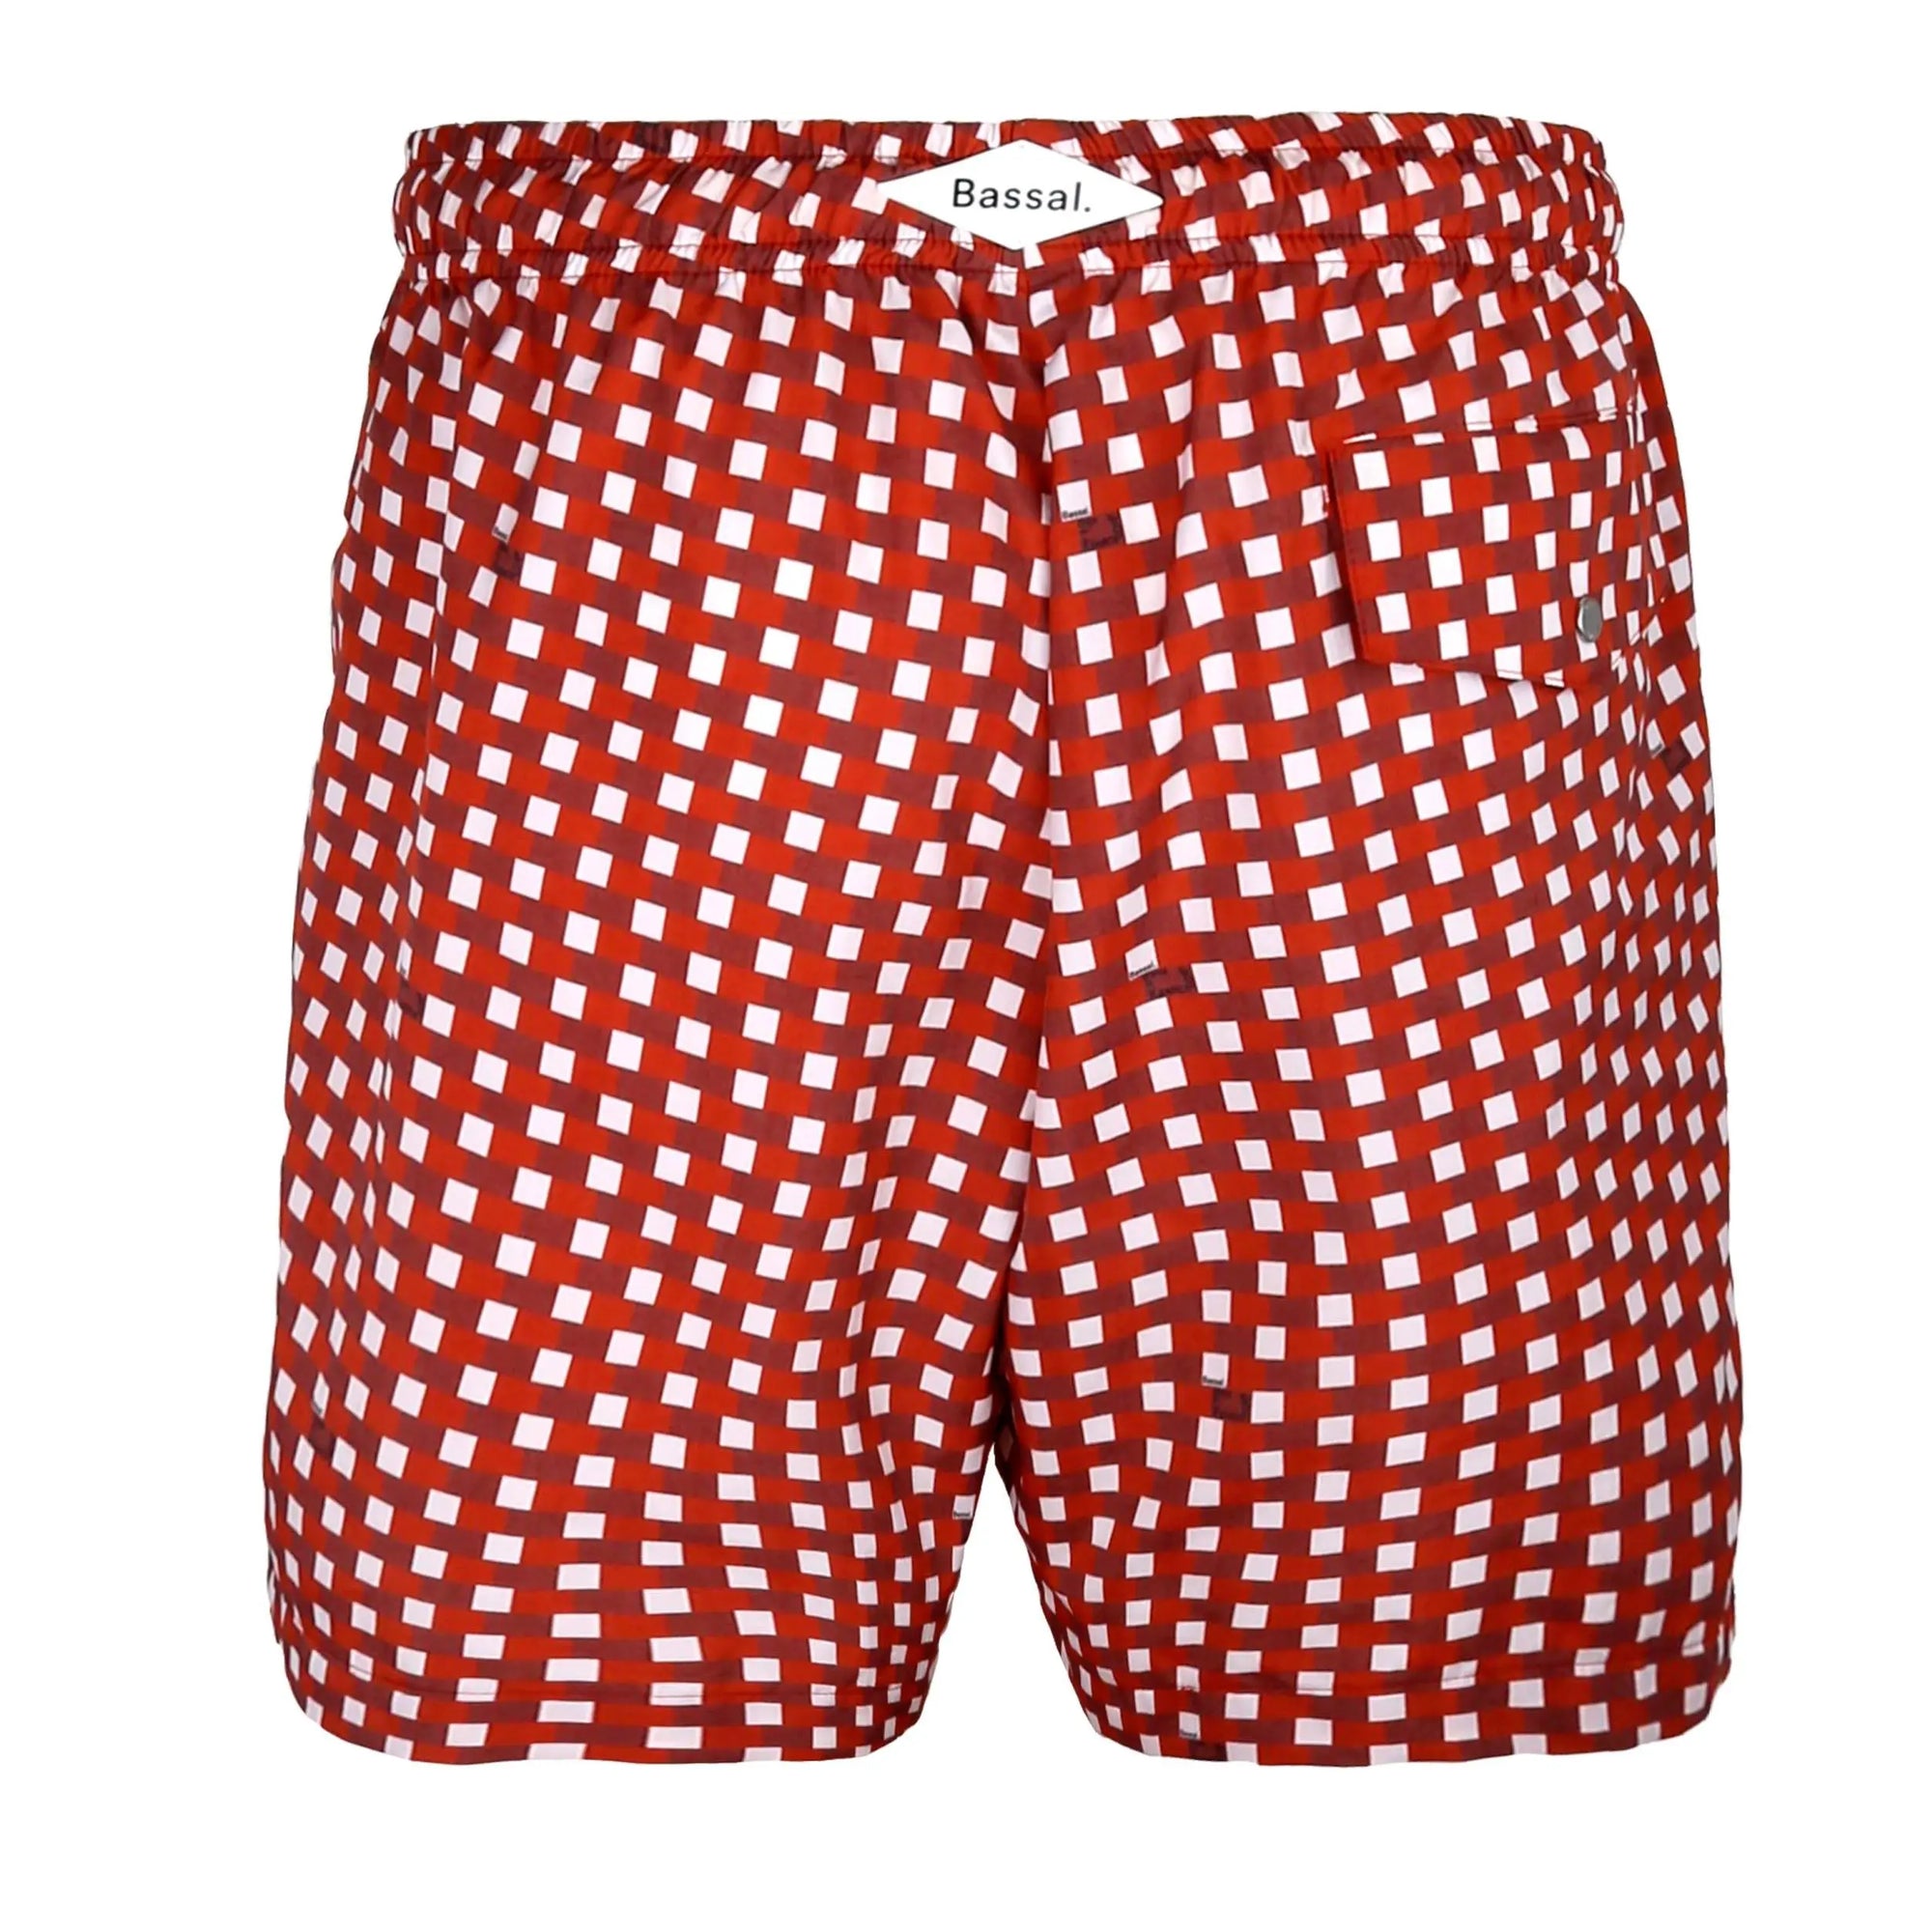 A pair of red and white checkered Paris Red Swimwear with an orange drawstring waistband are neatly folded inside an open box. A tag attached to the swimwear reads "Bassal." The box, showcased by BassalStore, and accompanying items are displayed in a clean, minimalist style against a white background.